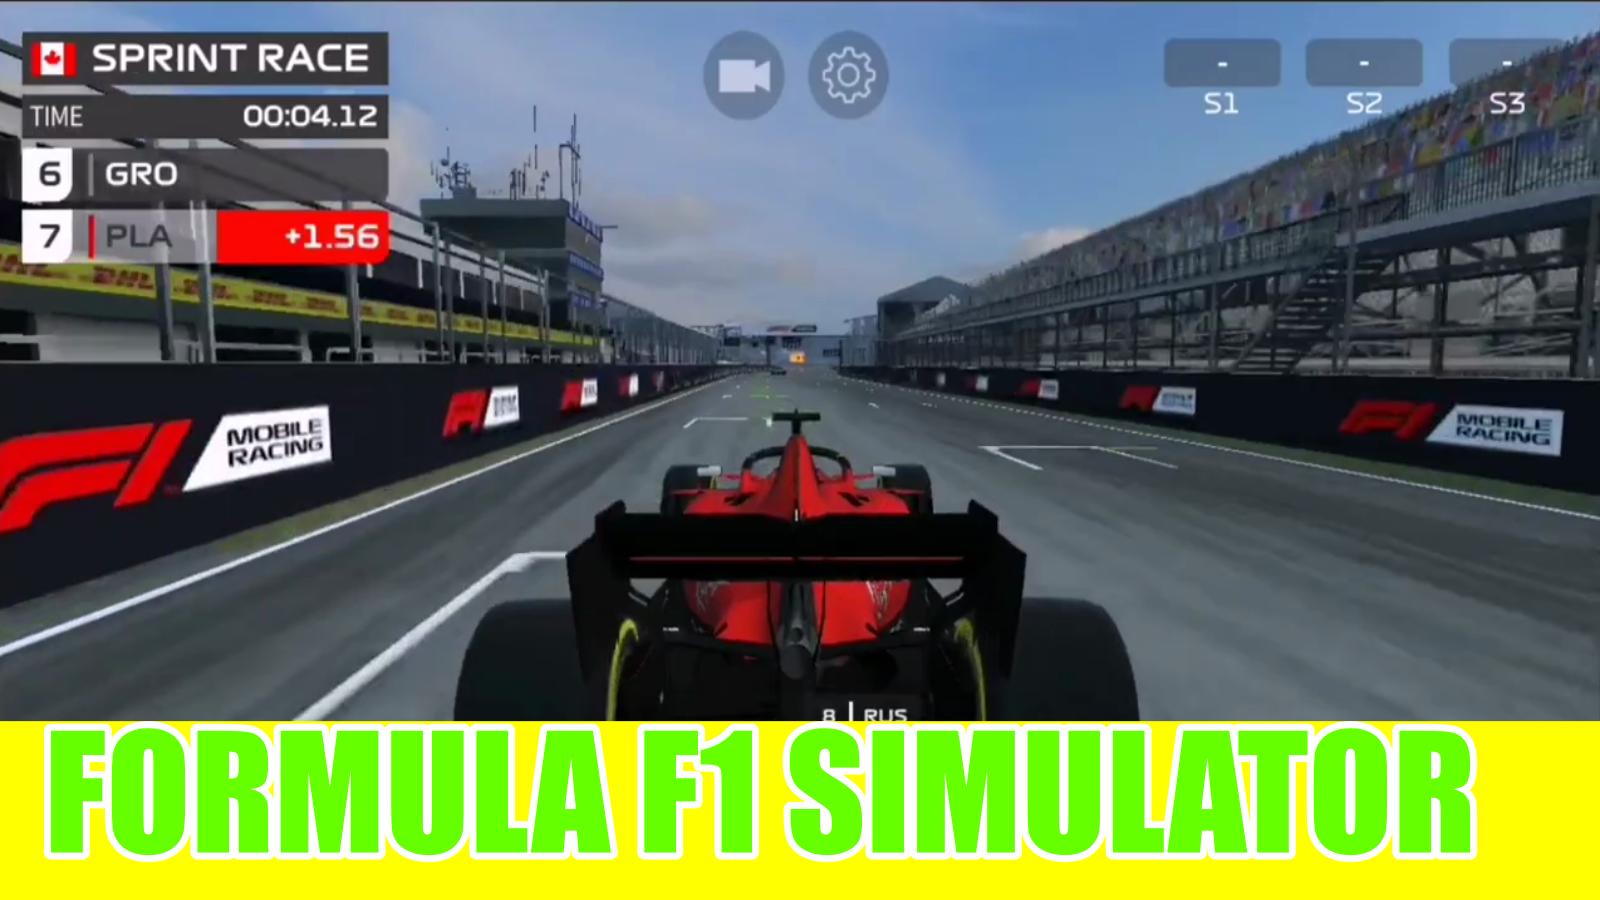 Formula F1 Racing Simulator APK Download for Android - Latest Version